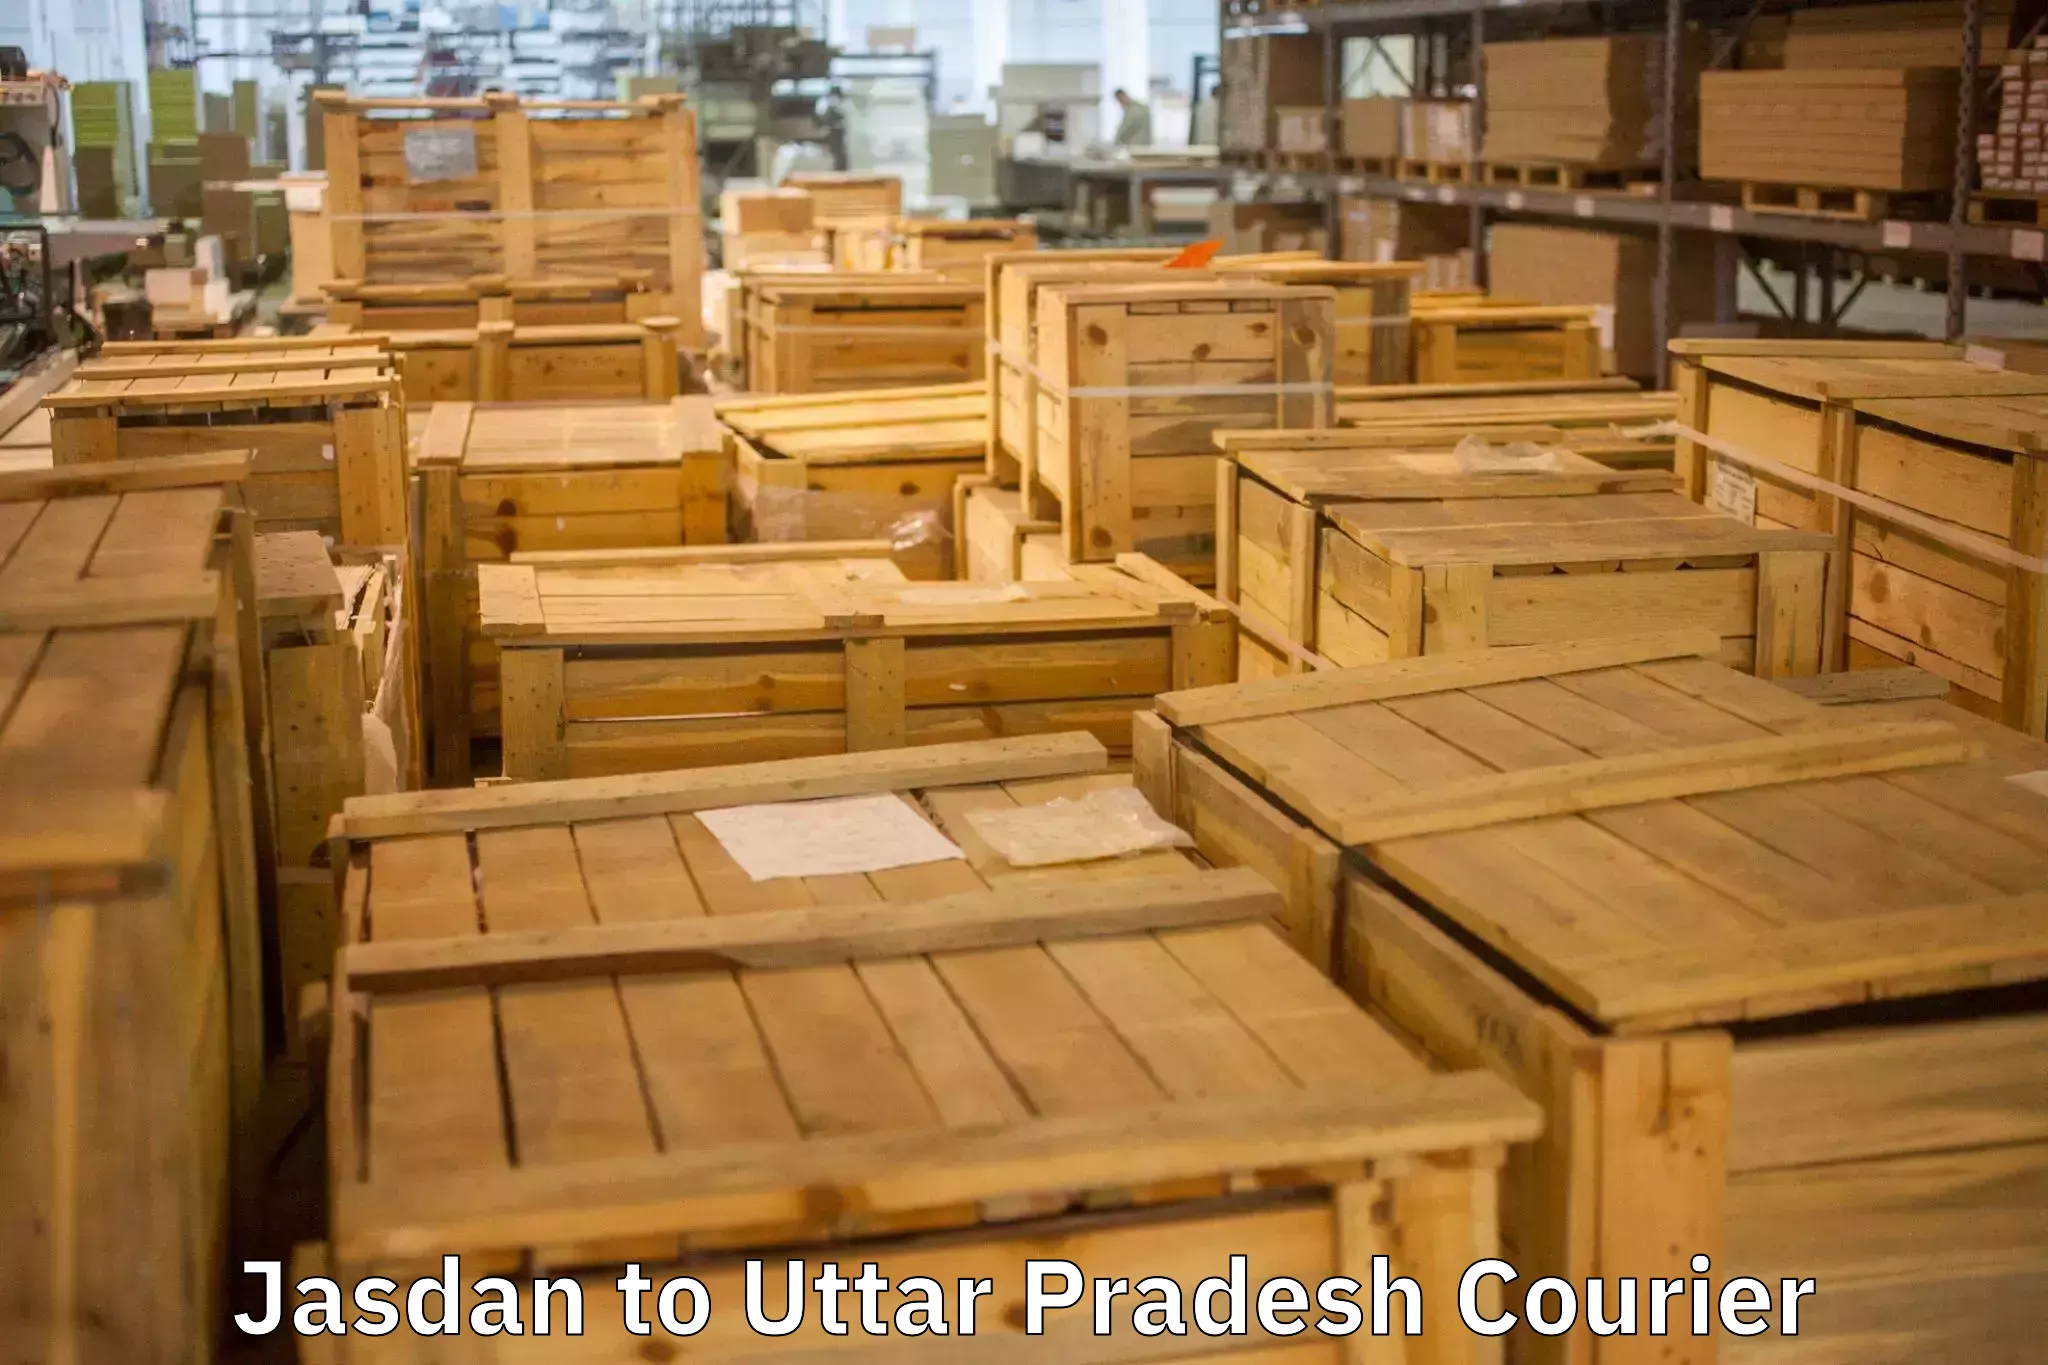 Efficient packing and moving Jasdan to Mathura